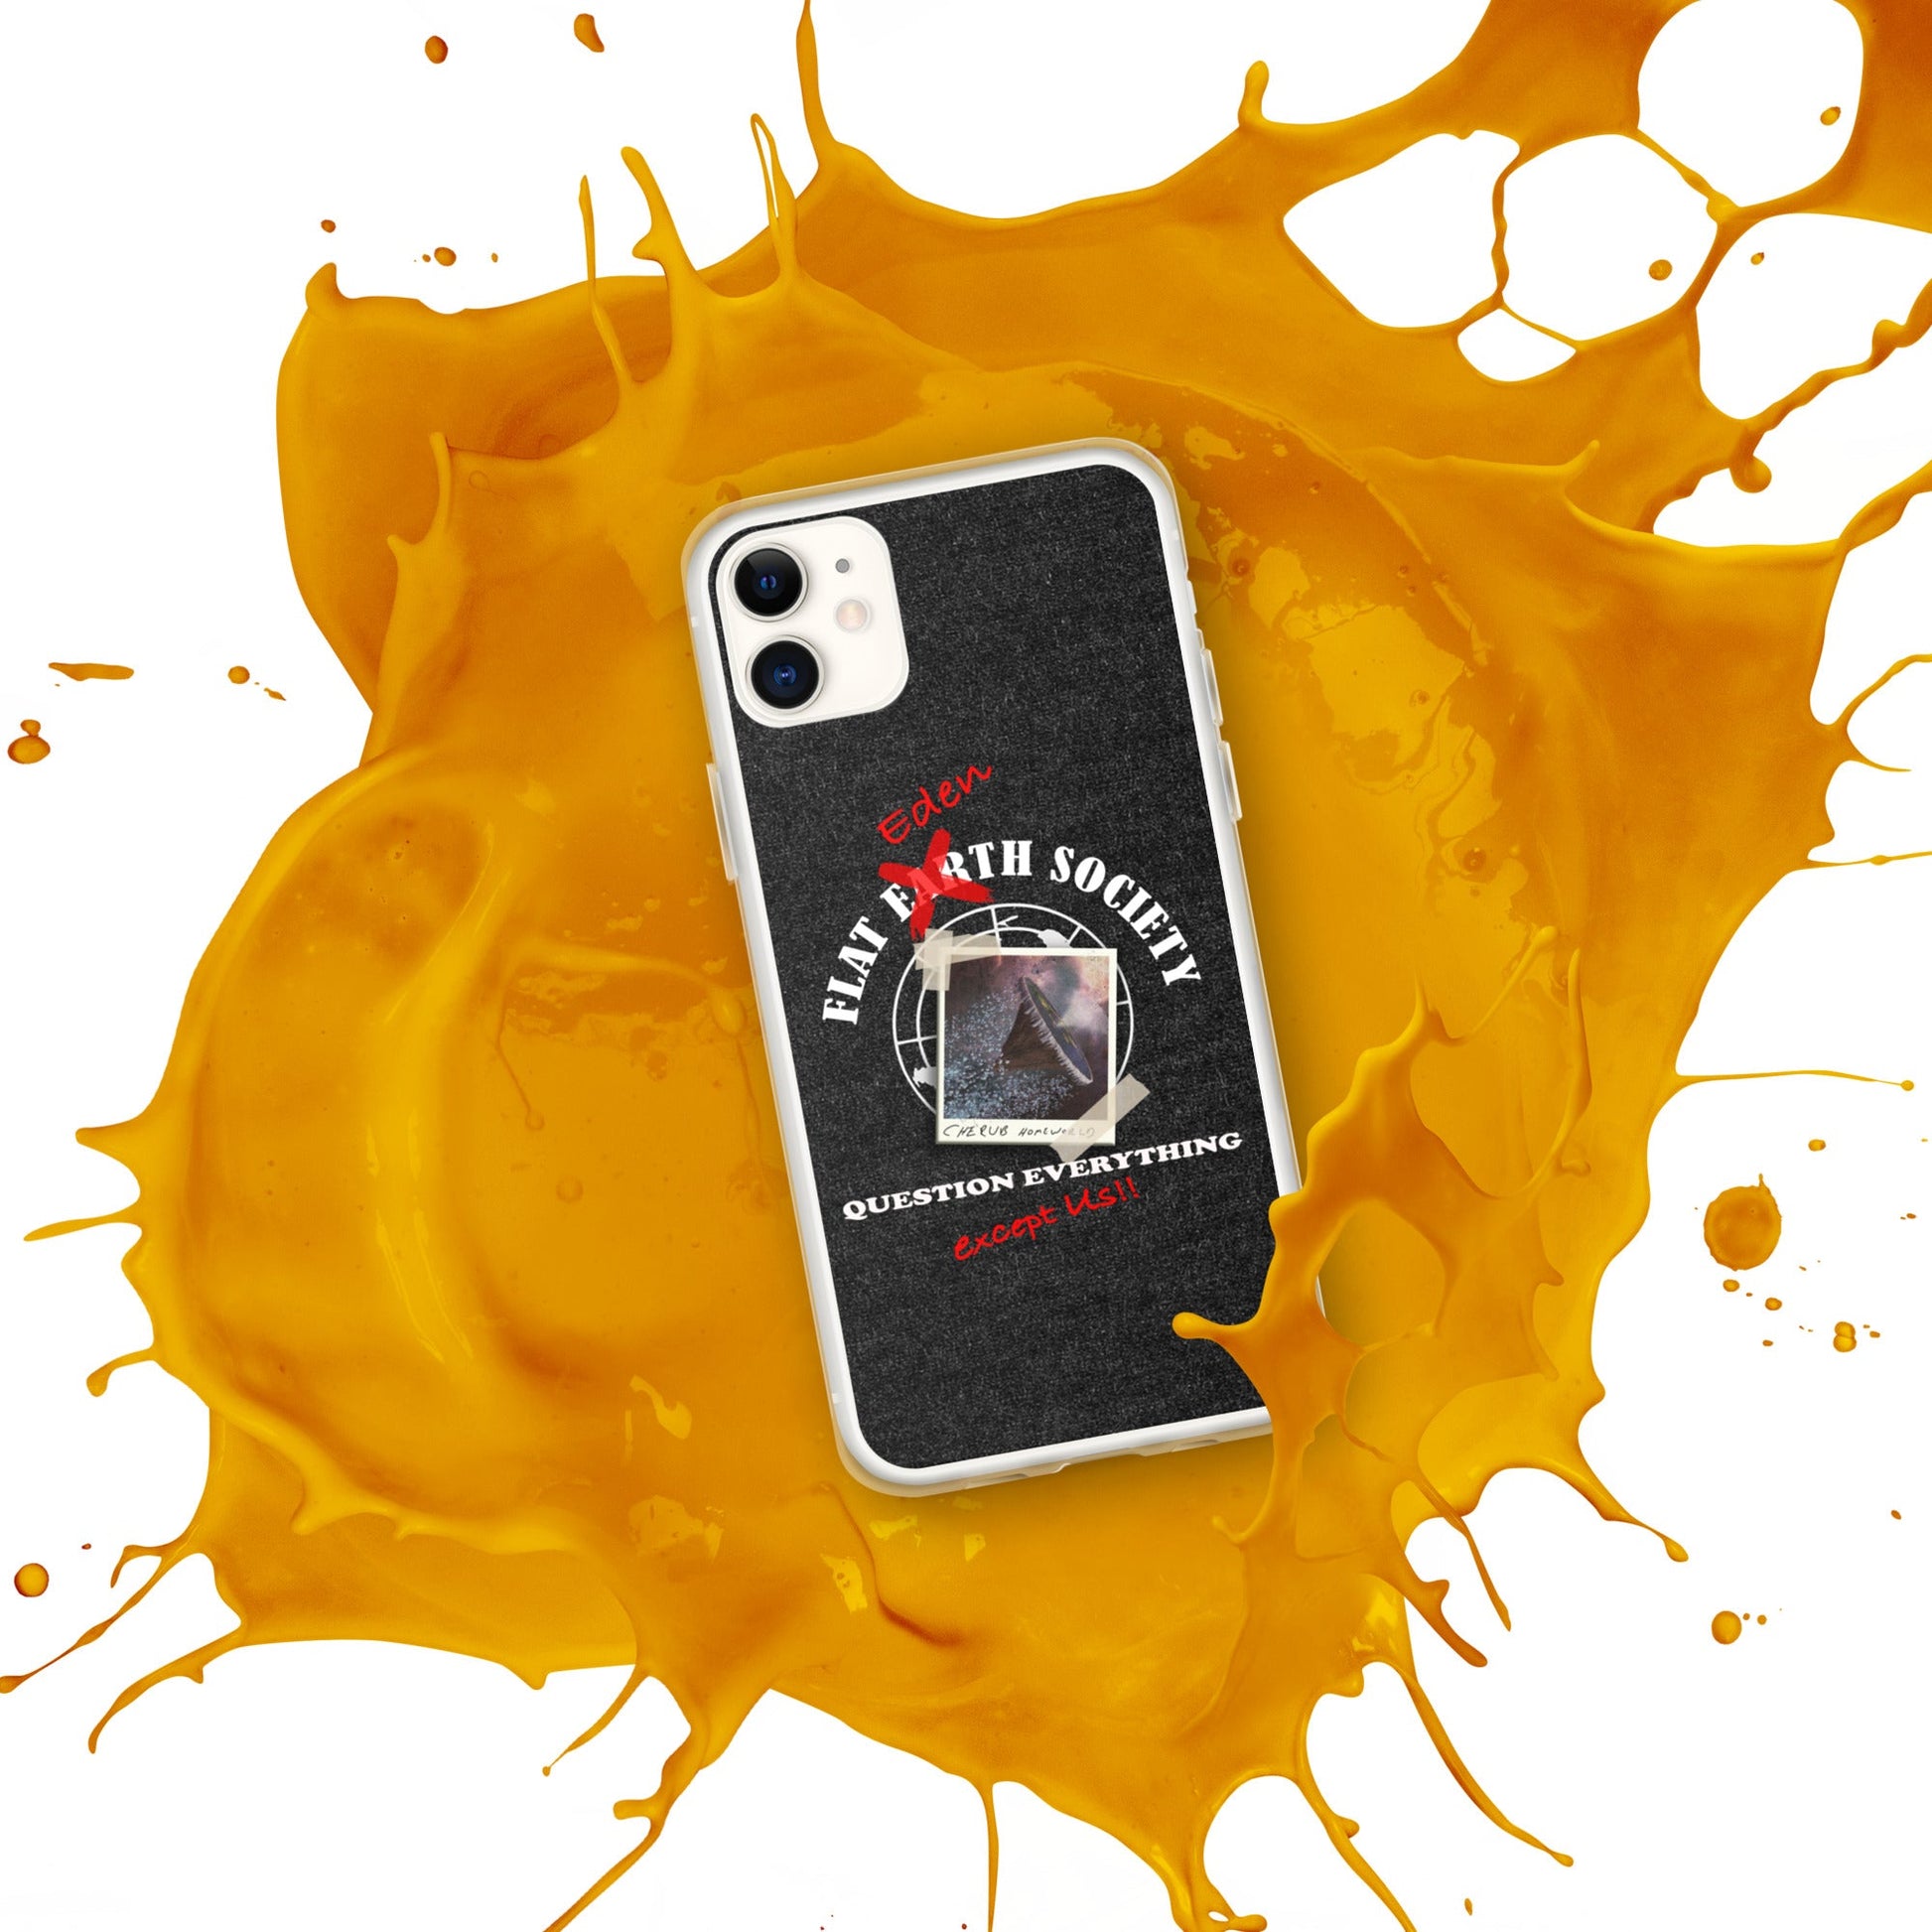 iPhone Case | Intergalactic Space Force 2 | Flat Eden Society - Spectral Ink Shop - Mobile Phone Cases -9780728_10994